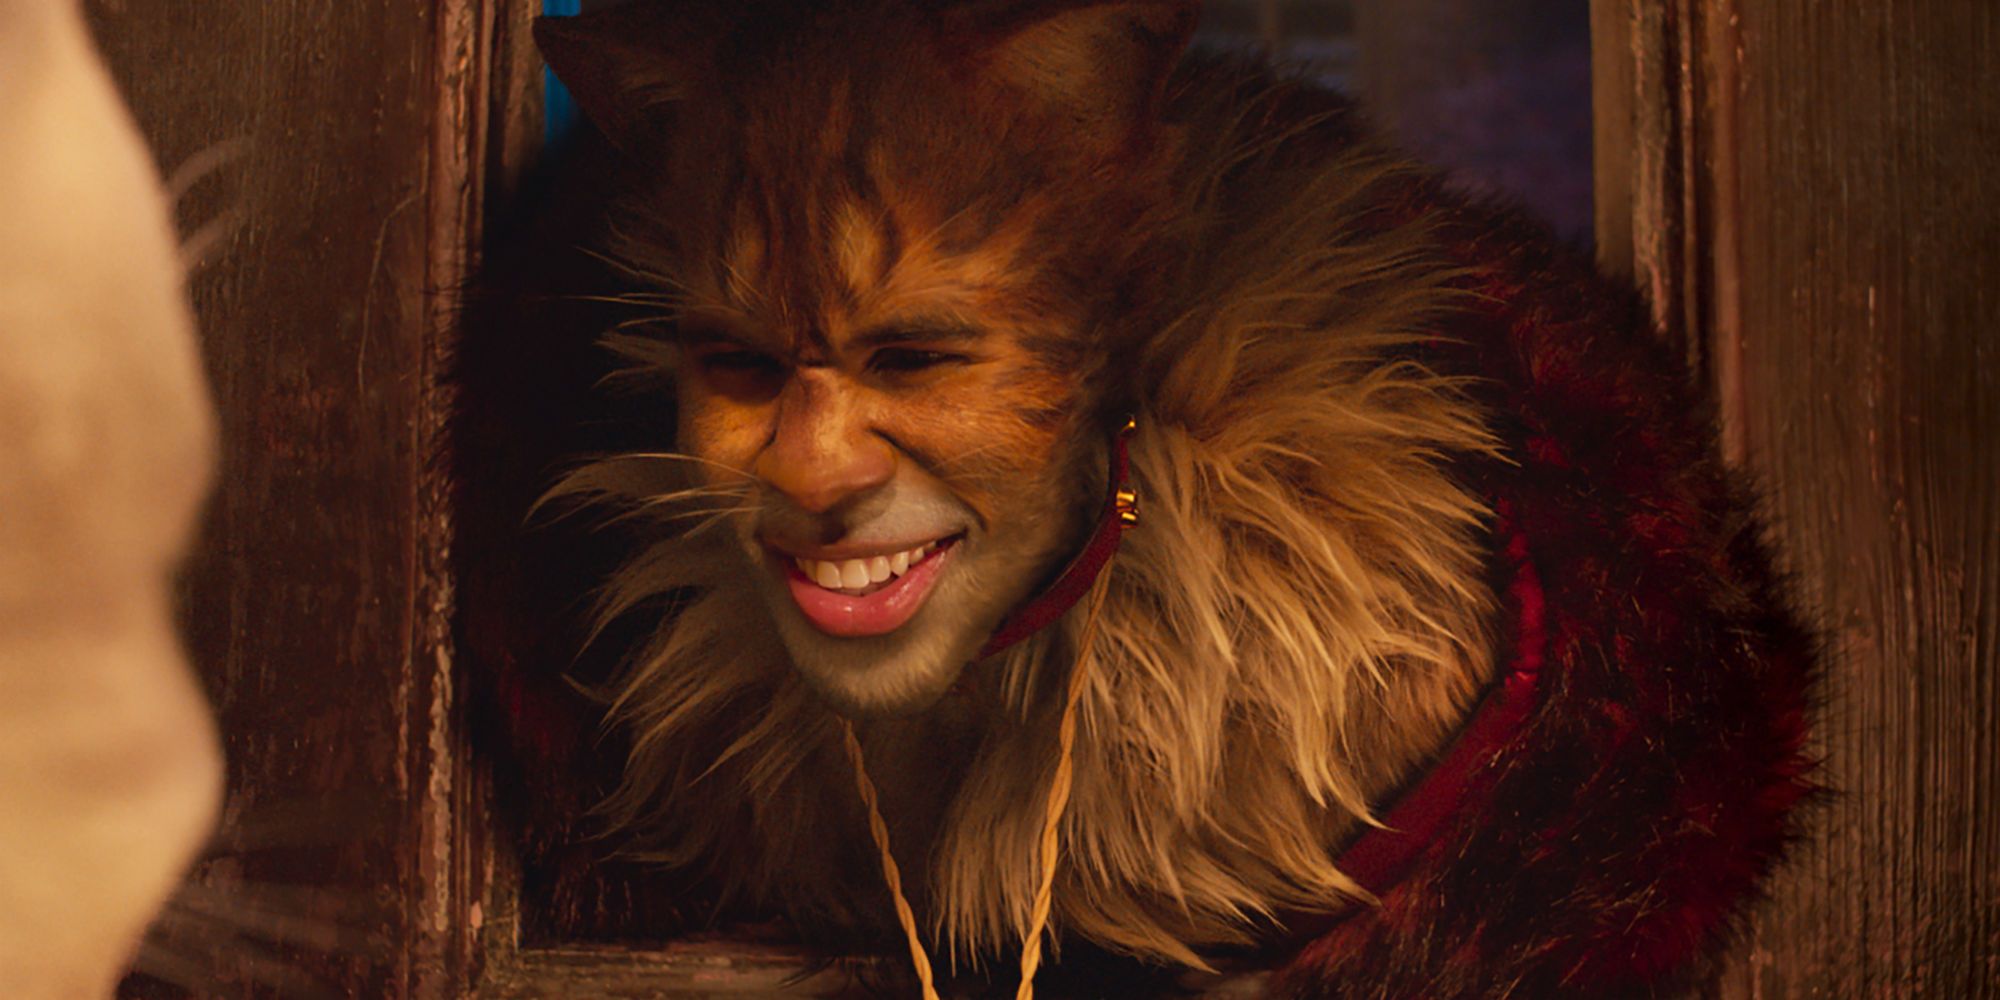 Andrew Lloyd Webber, composer of 'Cats' musical, calls movie version  'ridiculous